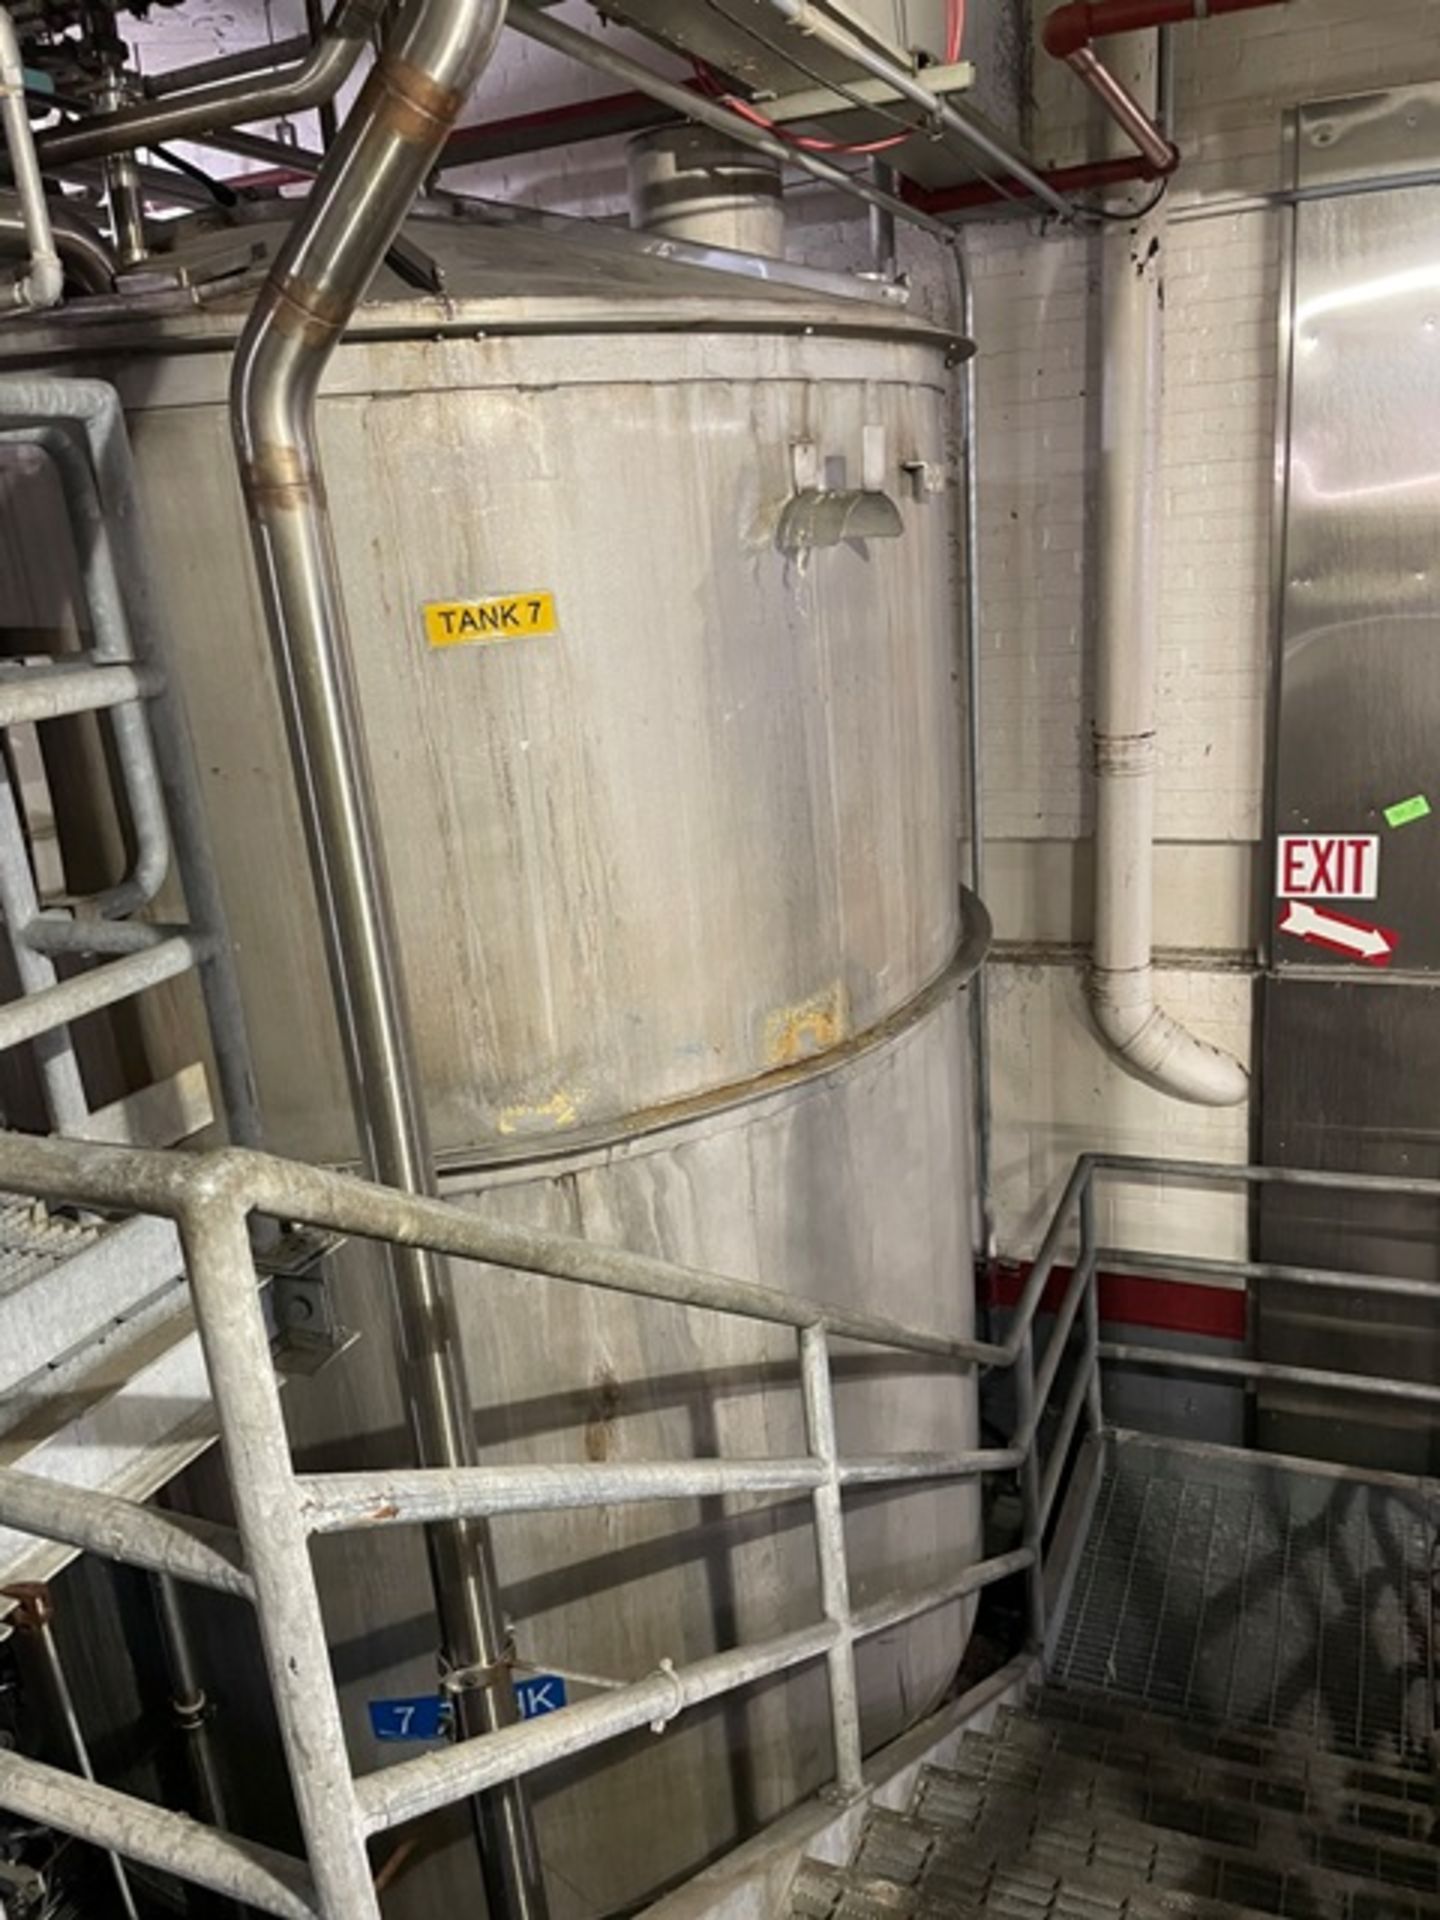 Stainless Steel Tank, Approx. 84" Diameter x 12', Includes Mixer, Rigging & Loading Fee: $4000 - Image 3 of 4